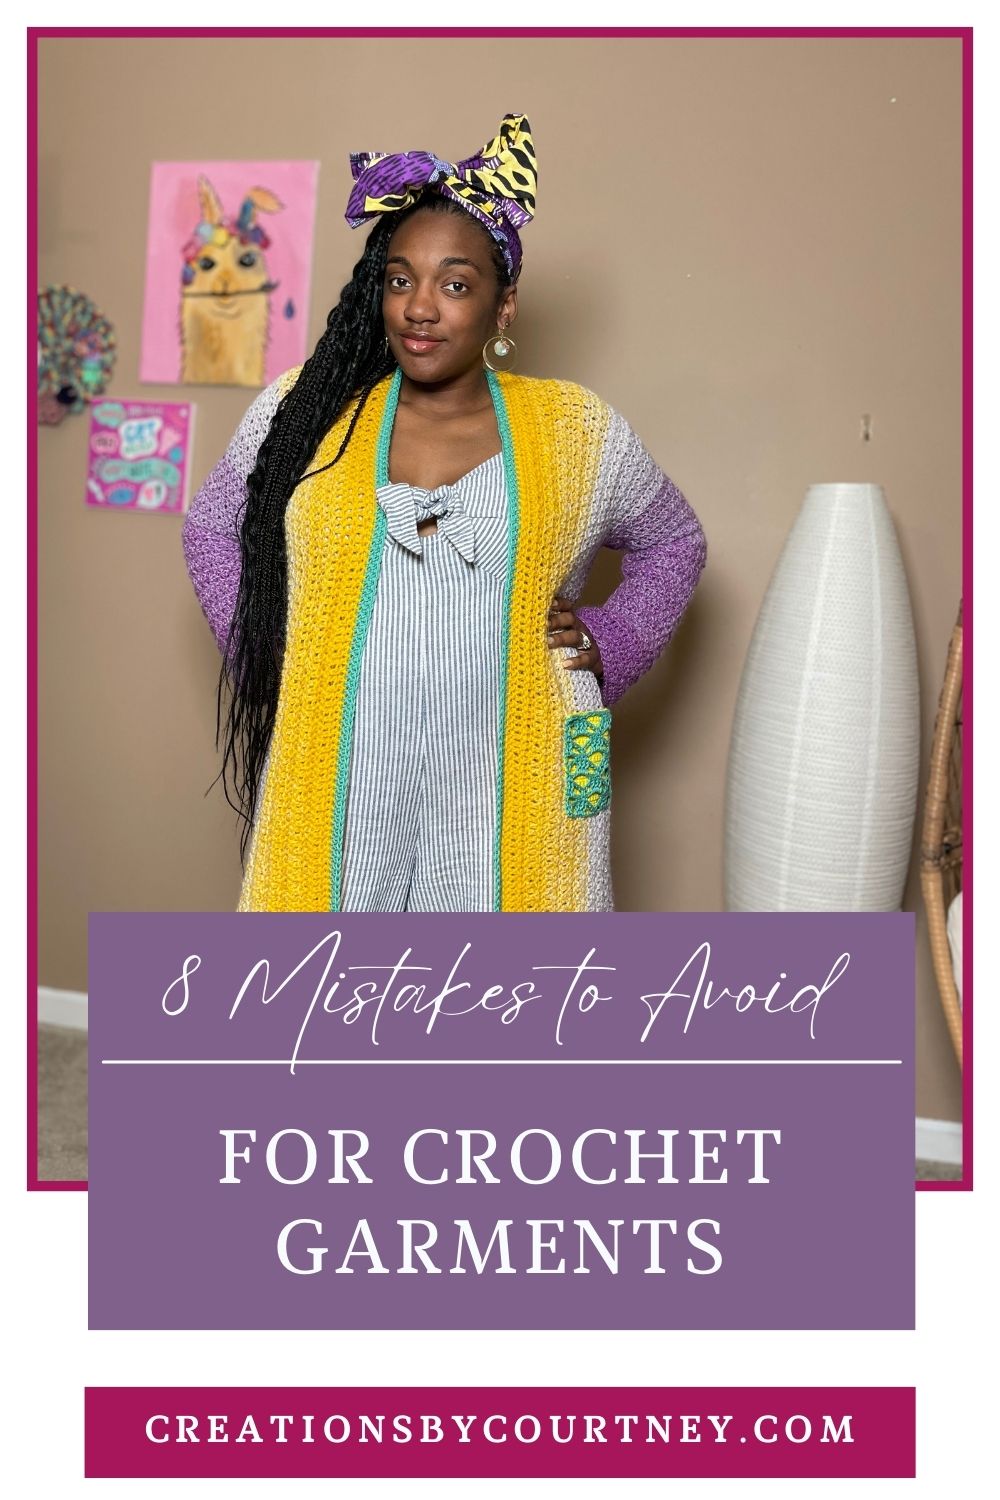 Avoid making 8 common mistakes when making a crochet garment. These include tips on how to complete the 8 tasks properly.